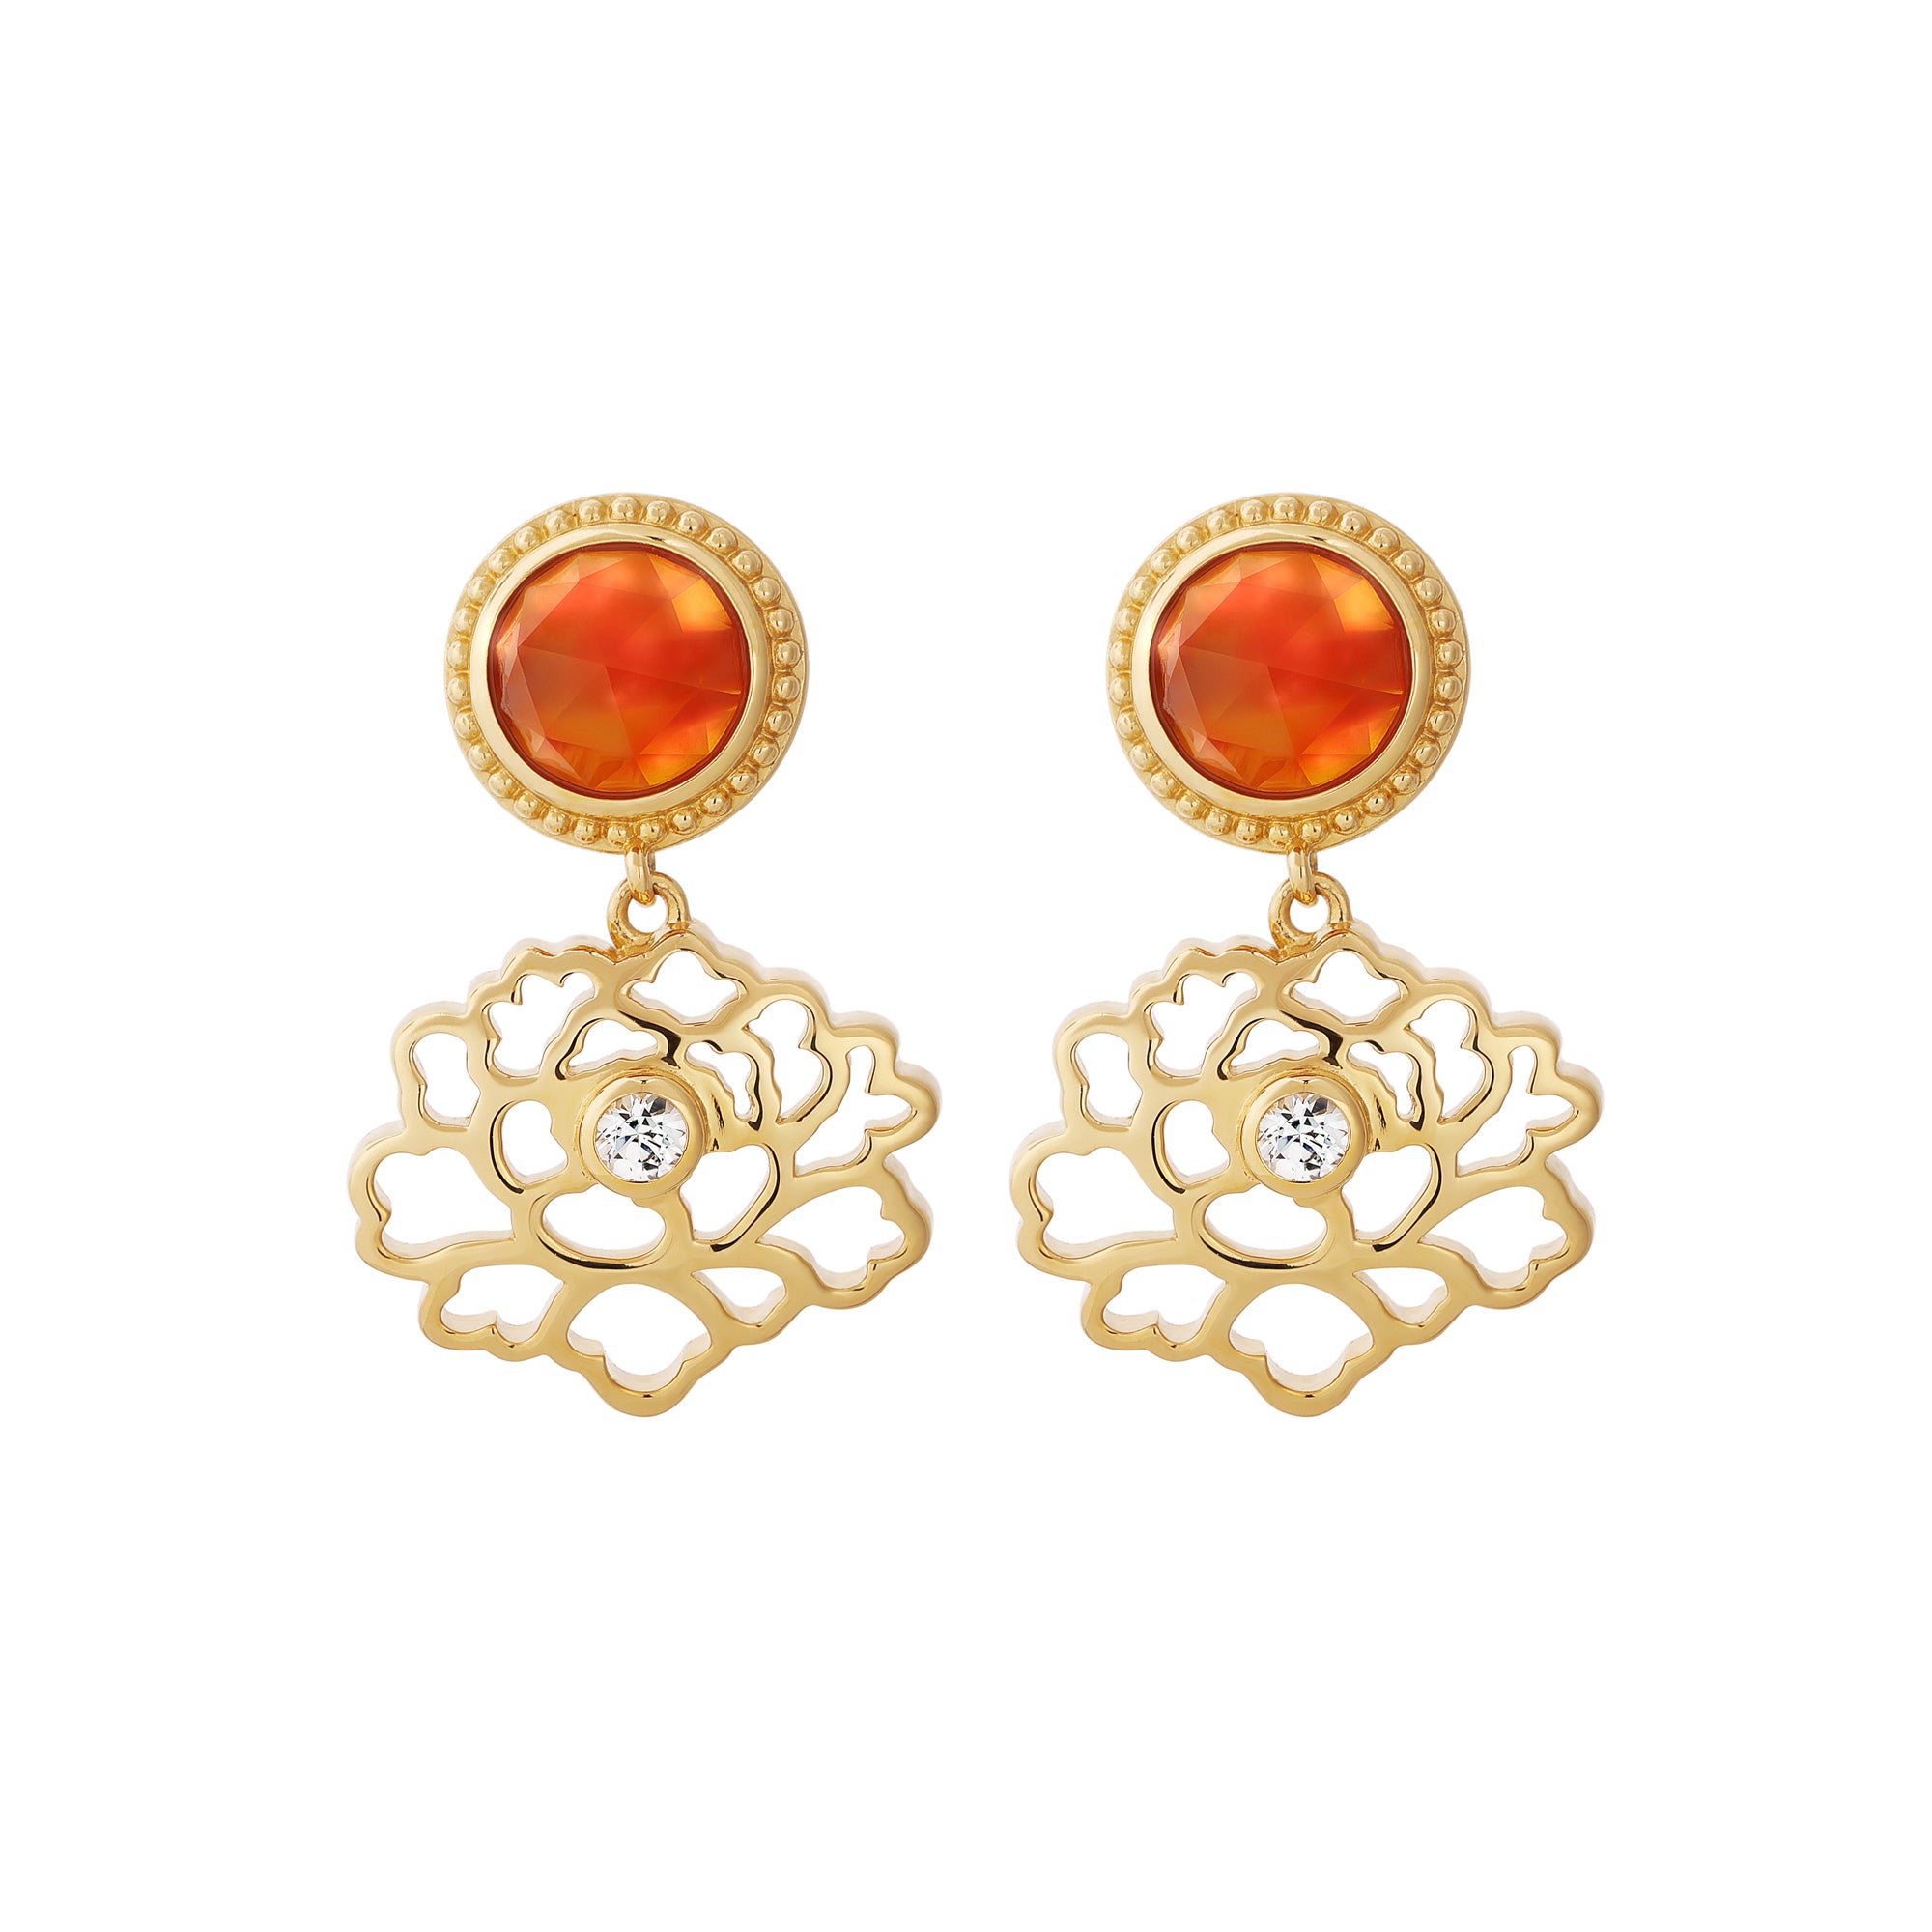 Majestic Tang Peony Earrings Gold Vermeil with Orange Carnelian | Shen Yun Collections